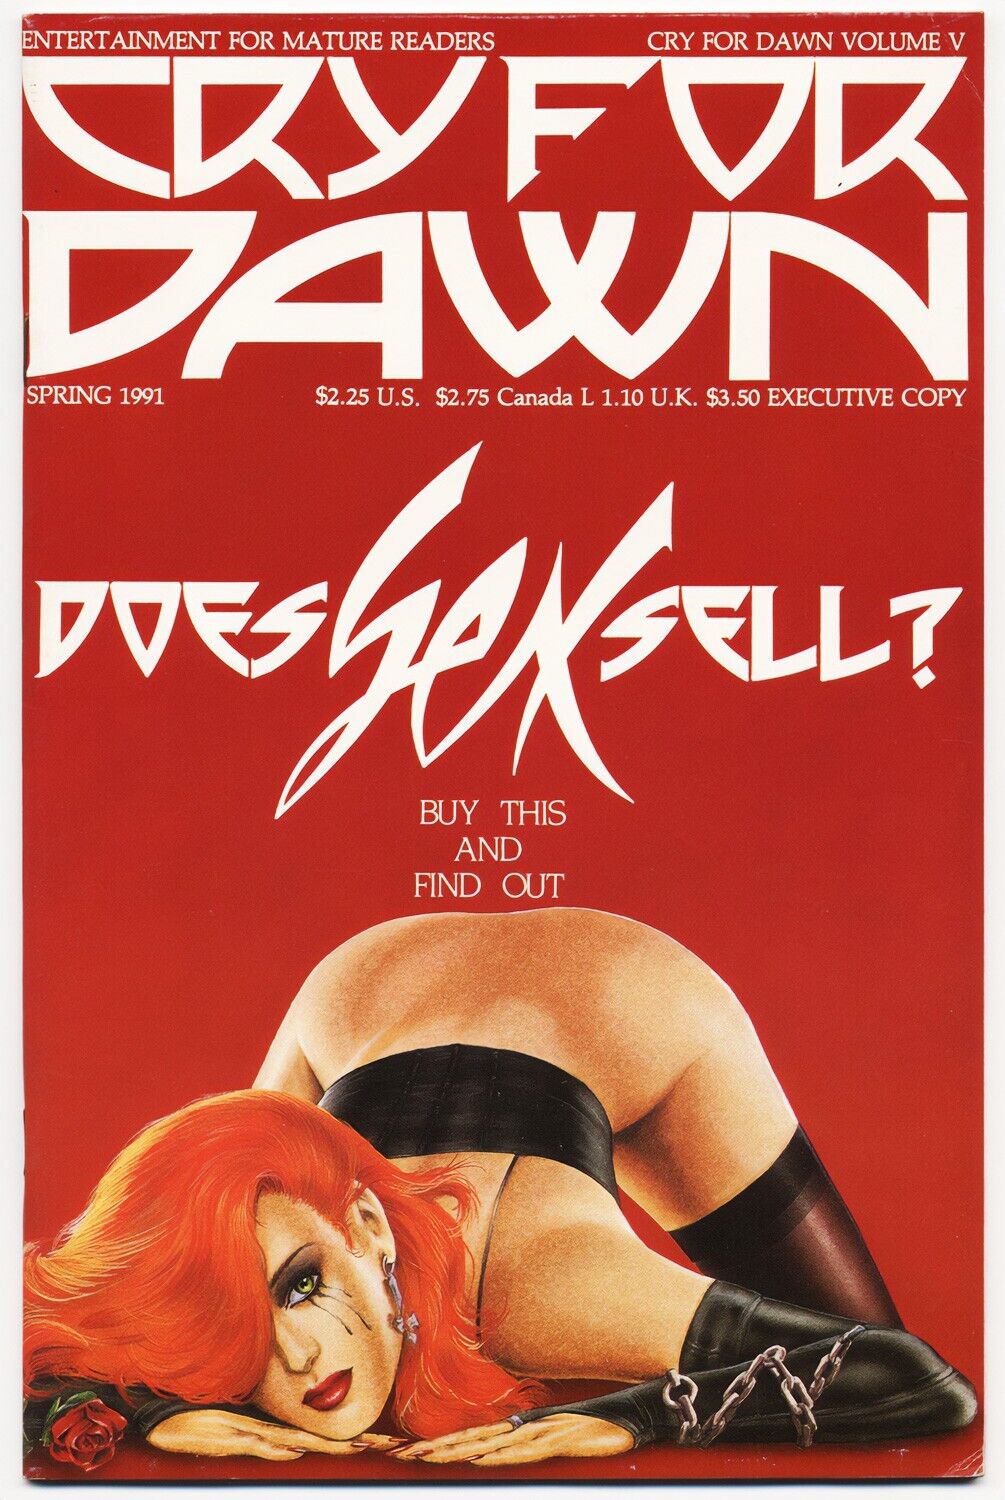 Cry For Dawn #5 (1991, Cry For Dawn)